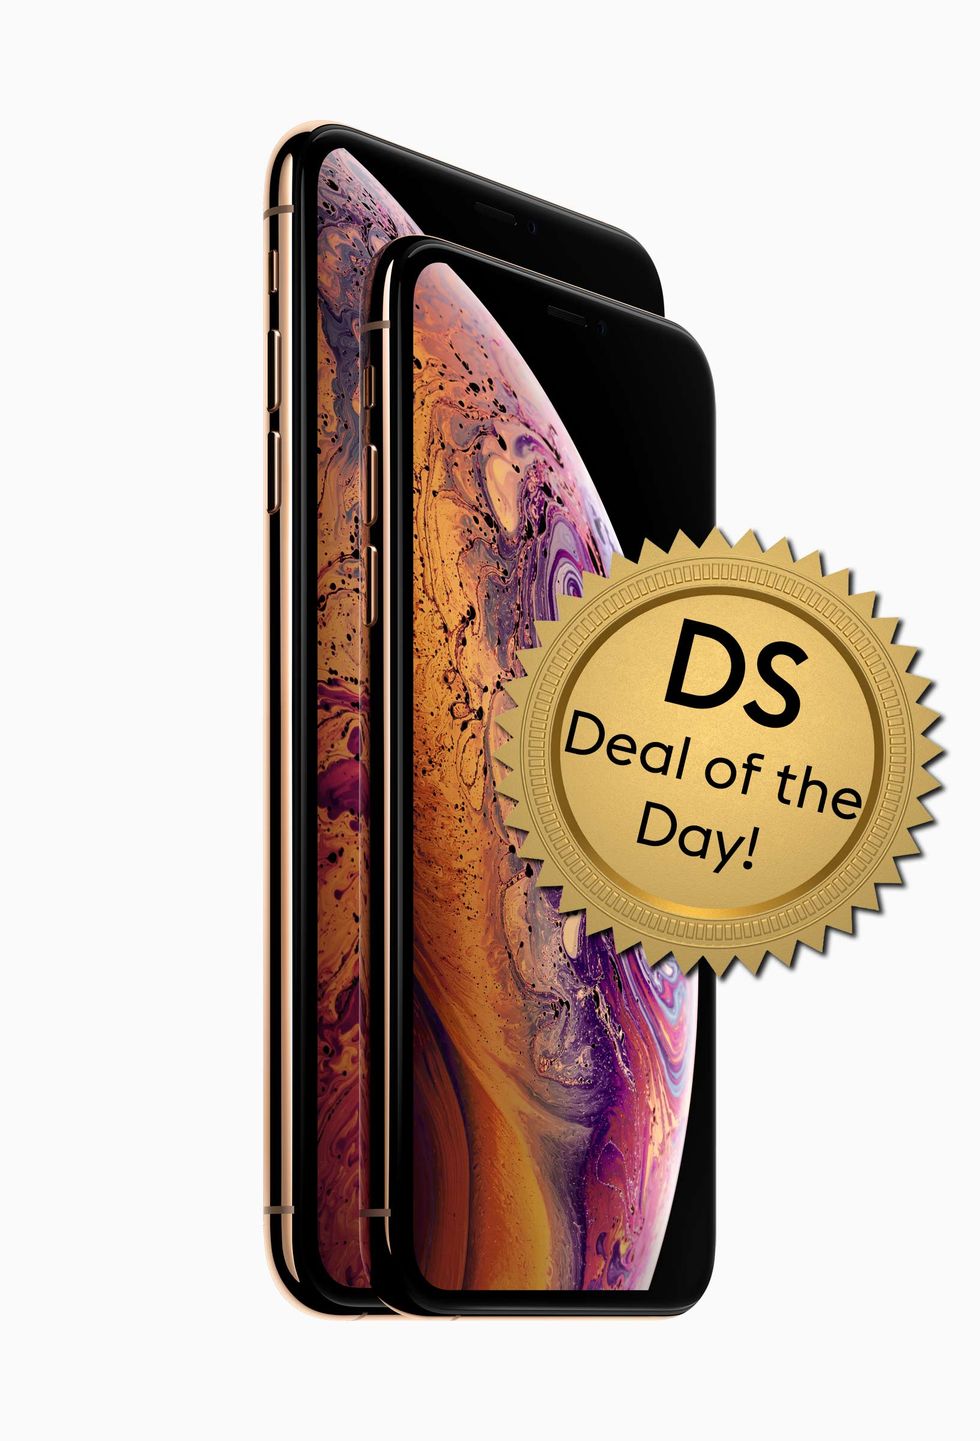 Deal of the day iPhone XS deals with 0 upfront cost from VOXI